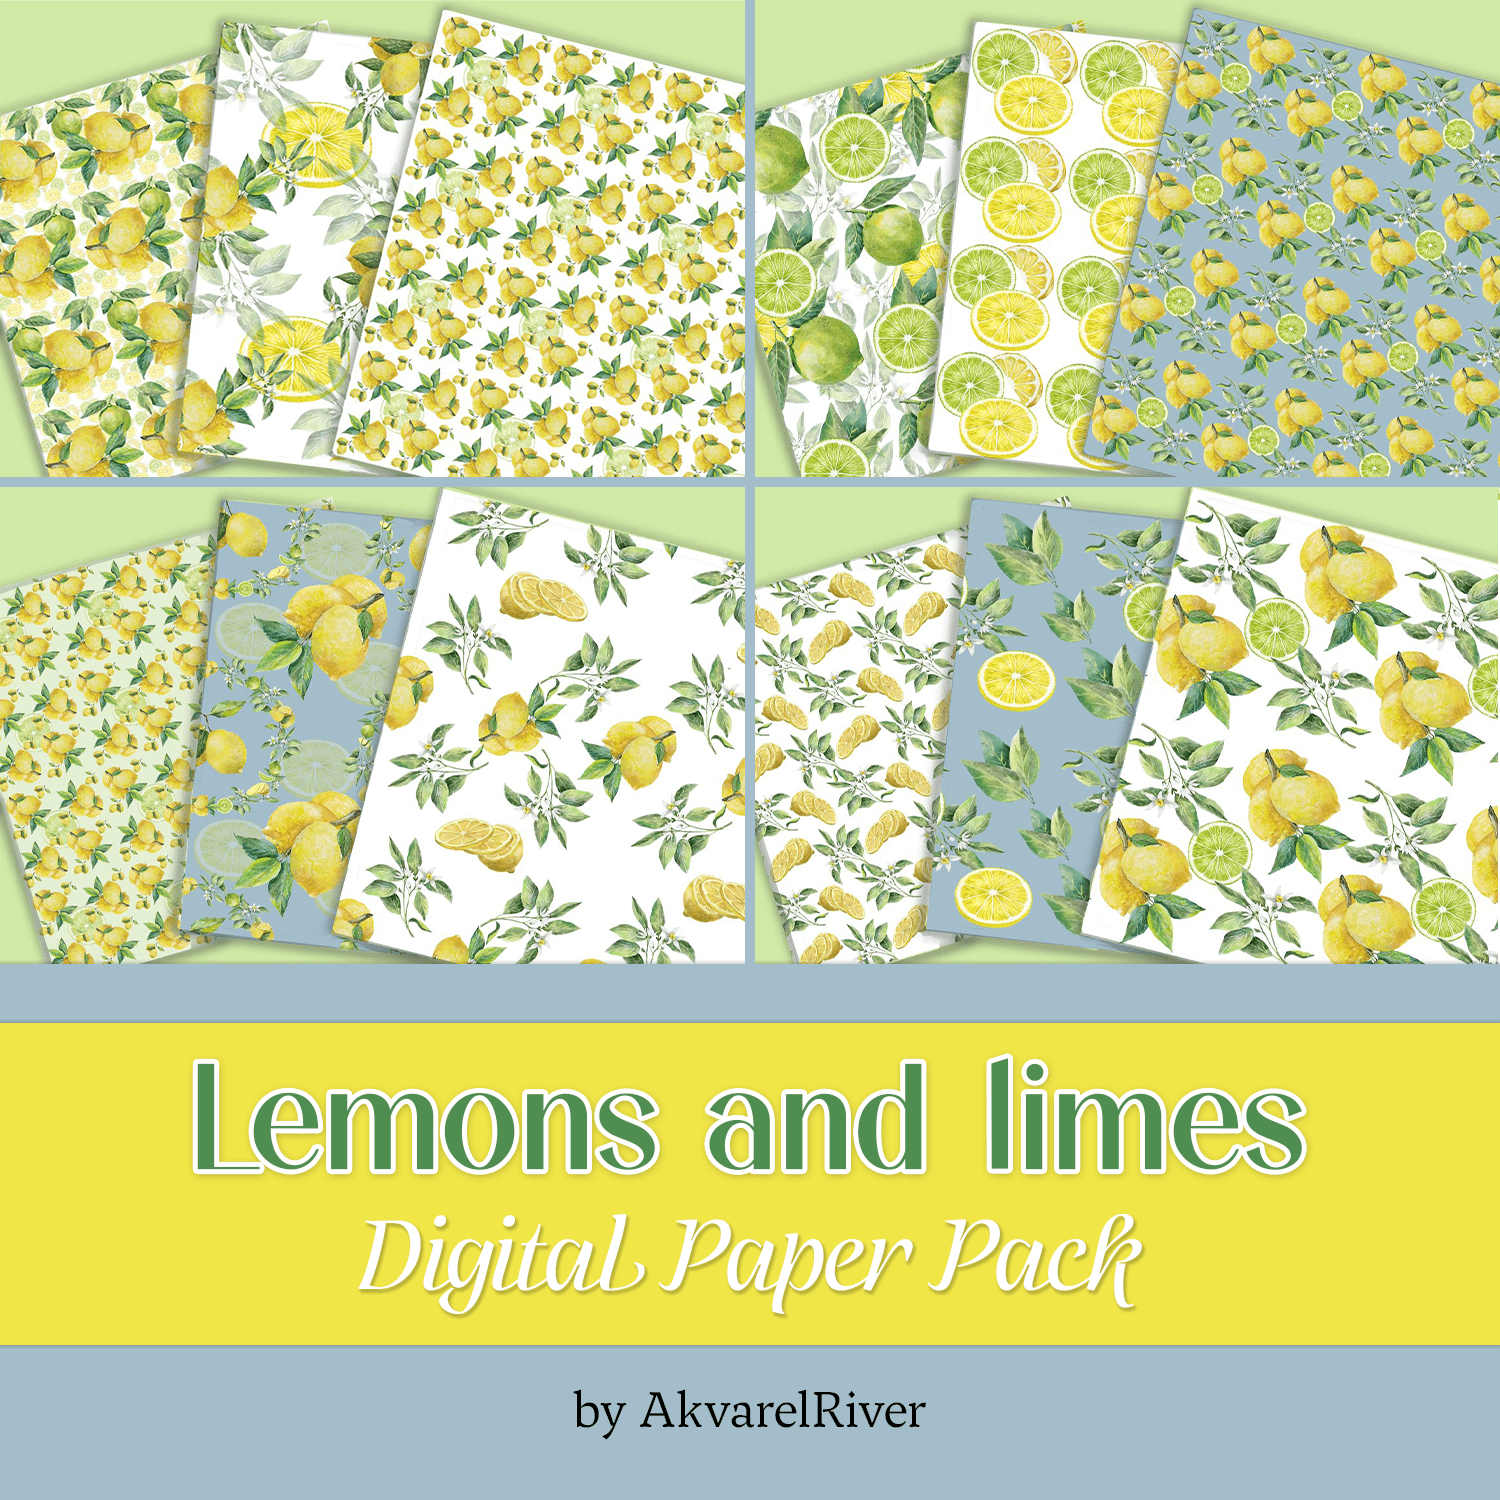 Lemons and limes Digital Paper Pack cover.